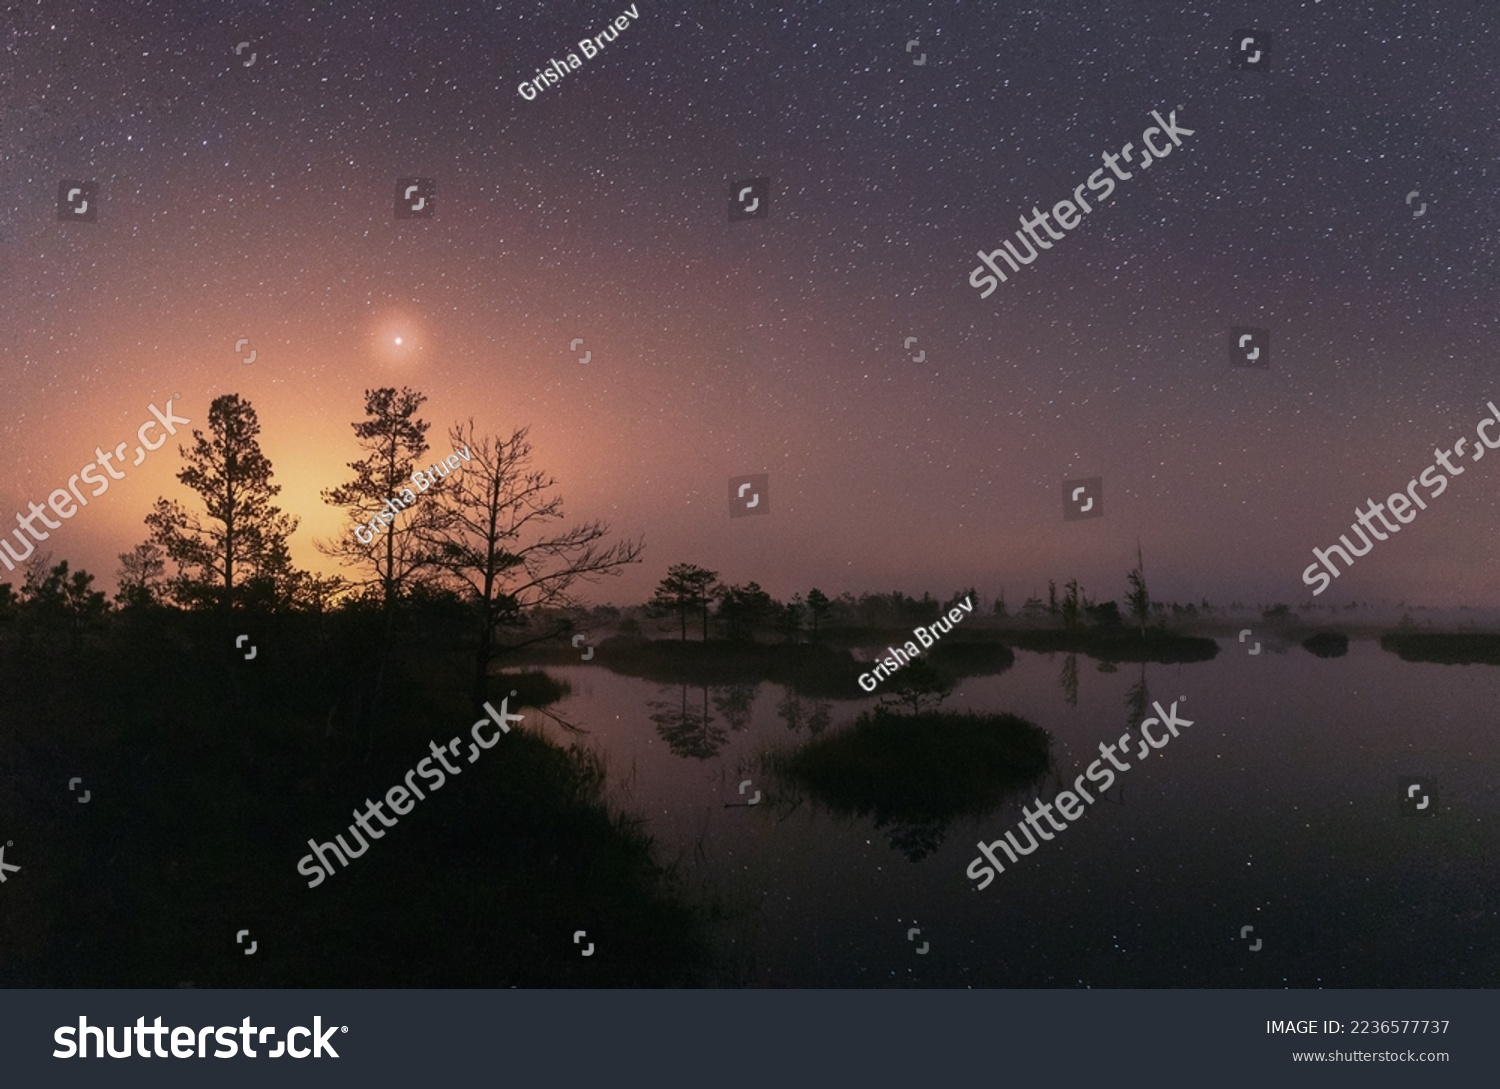 Amazing Glowing Stars Effects Above Landscape. Milky Way Galaxy In Night Starry Sky Above Rural Landscape In Summer Season. Real Colorful Night Stars Above Swamp. Natural Starry Sky Above Landscape. #2236577737